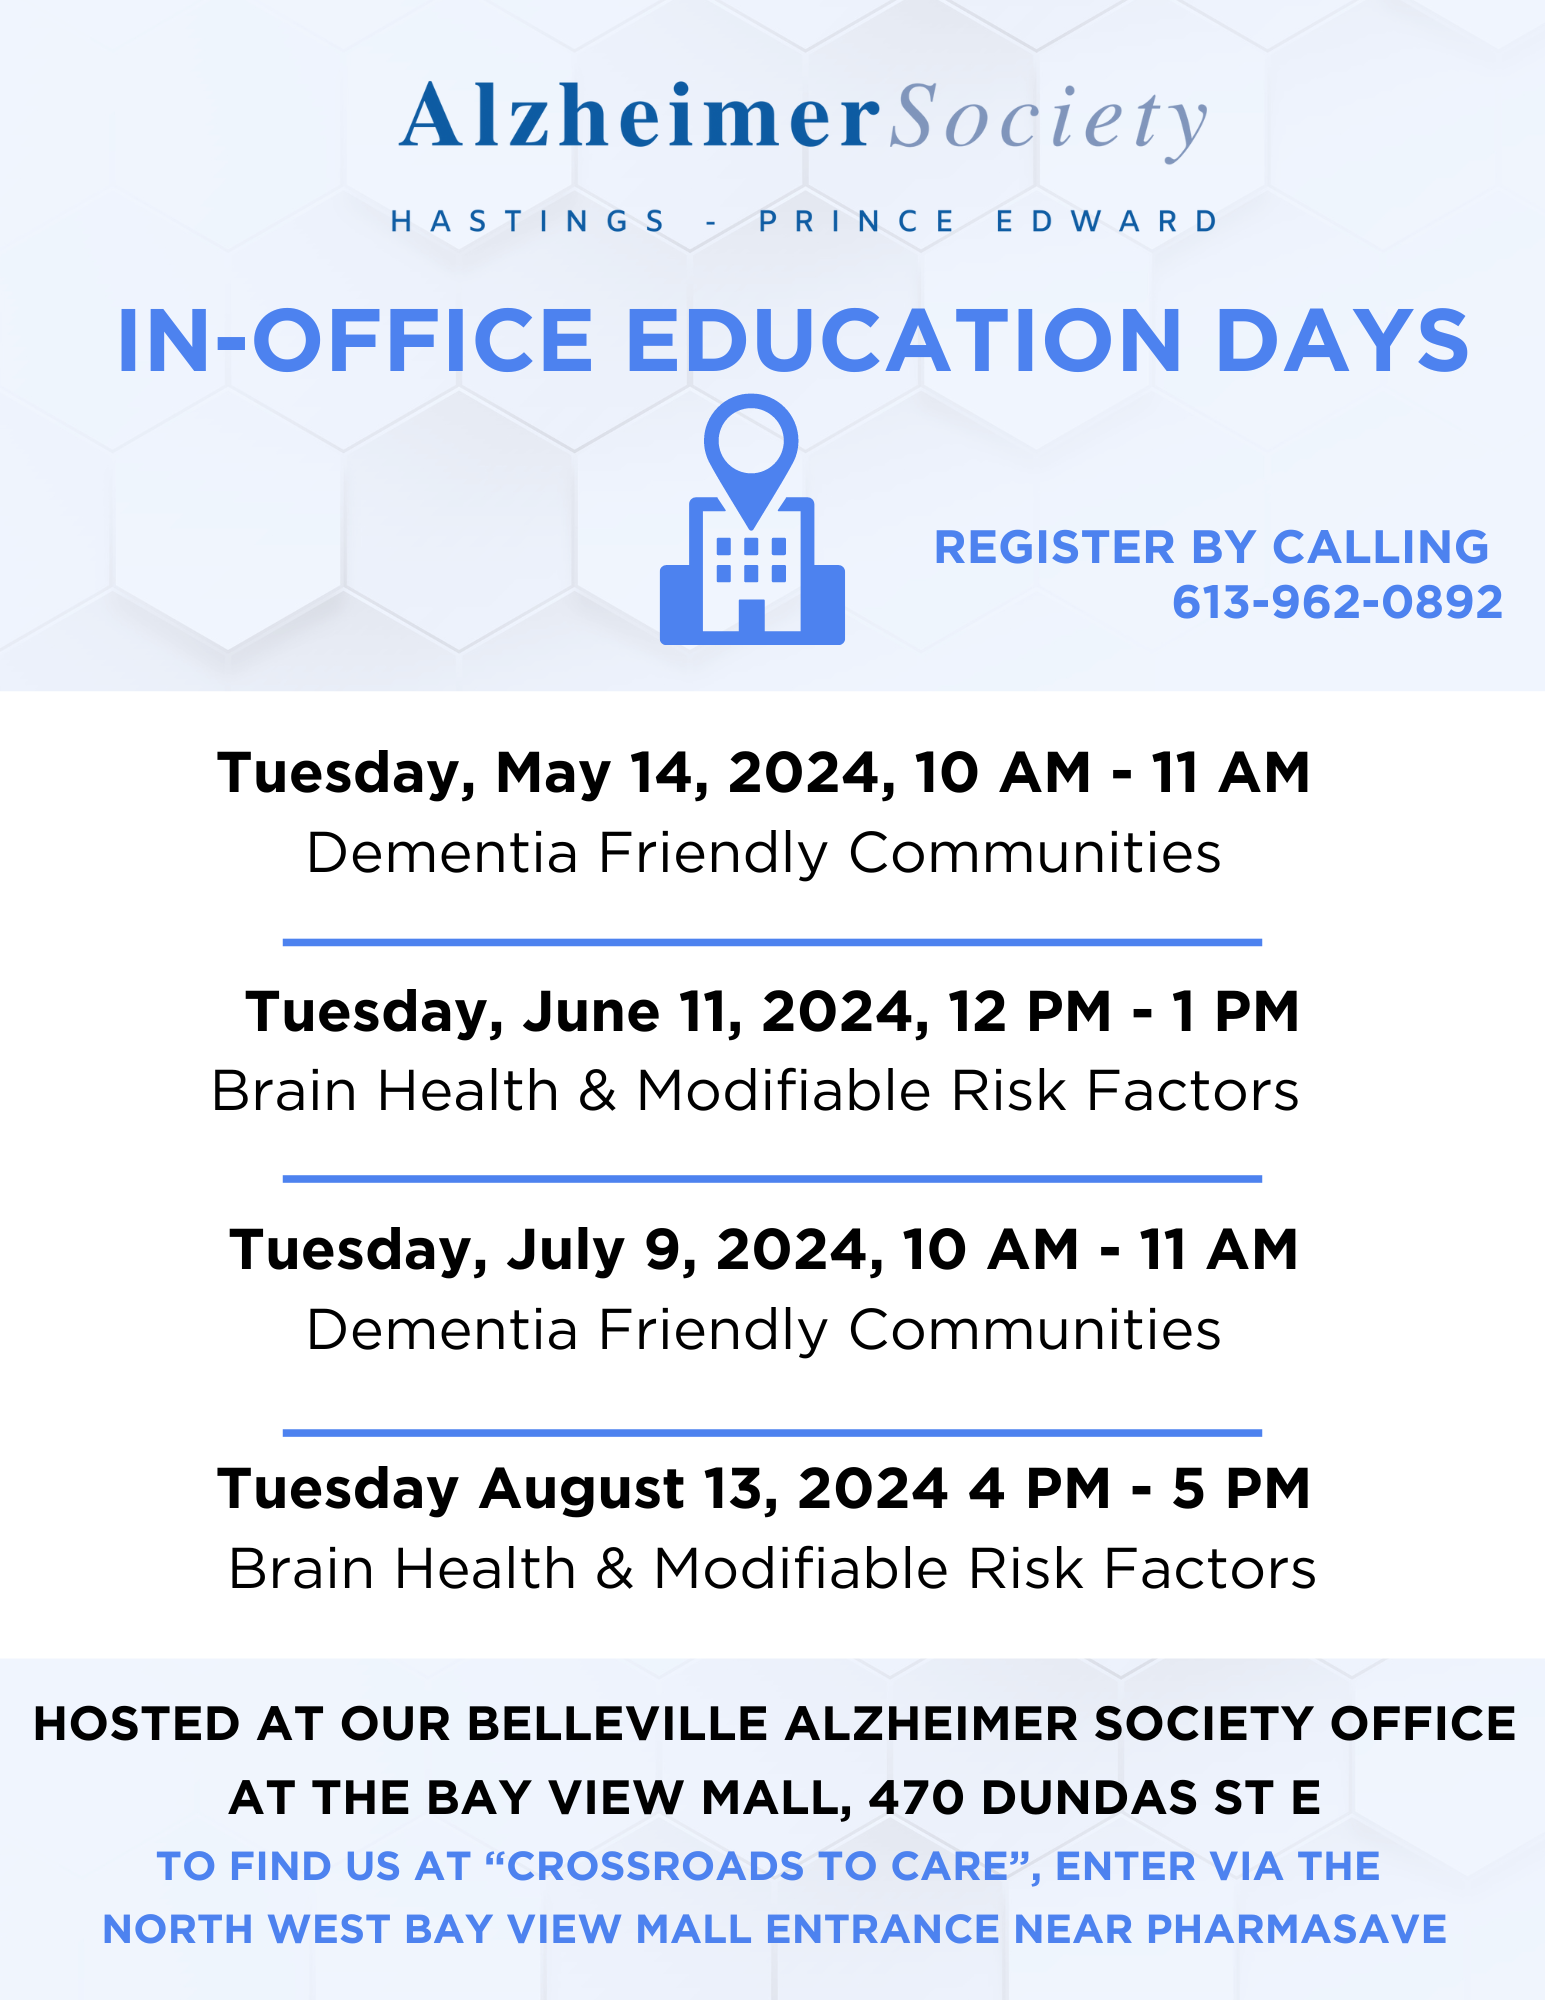 In Office Education Days 2024 - May 14, June 11, July 9, August 13th. Please call for more information or to register at 6139620892